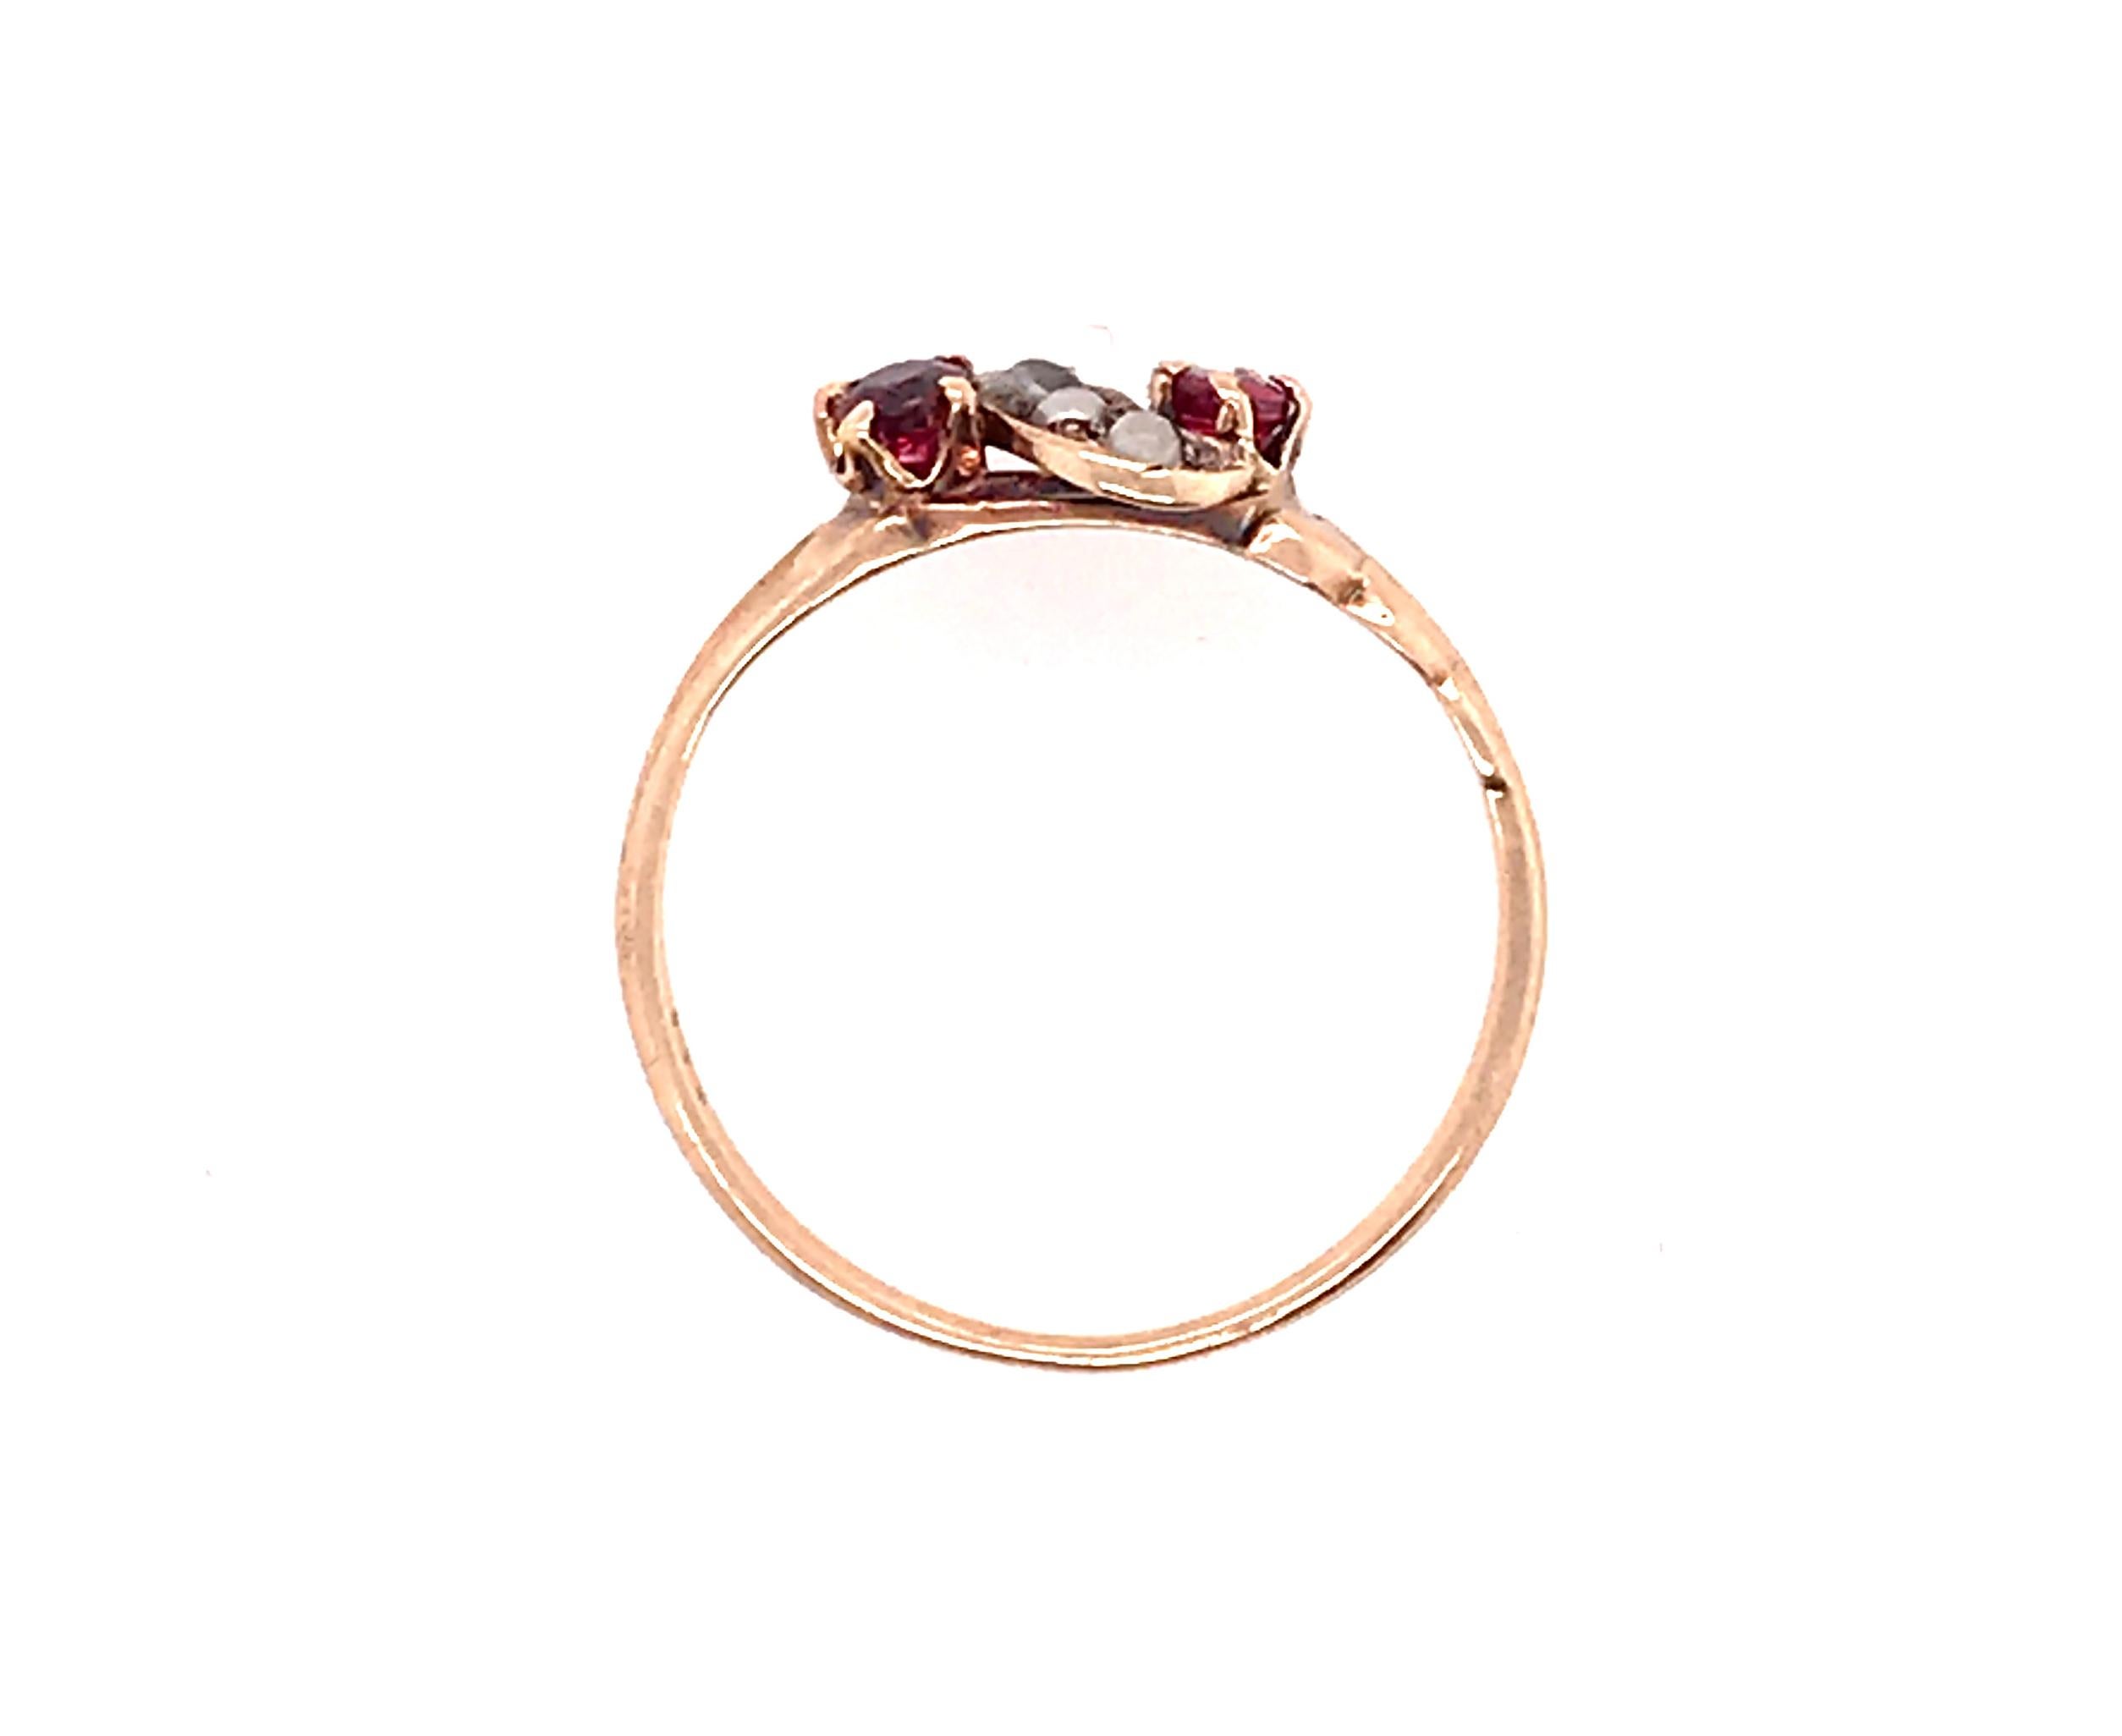 Genuine Original Art Deco Antique from 1940's Ruby Seed Pearl Cocktail Ring .25ct  Yellow Gold


Features Two Genuine Natural Round Cut Ruby Gemstones Totaling .25ct

Genuine Seed Pearls Accent Nicely 

Ruby is The Birthstone for July

Trademarked